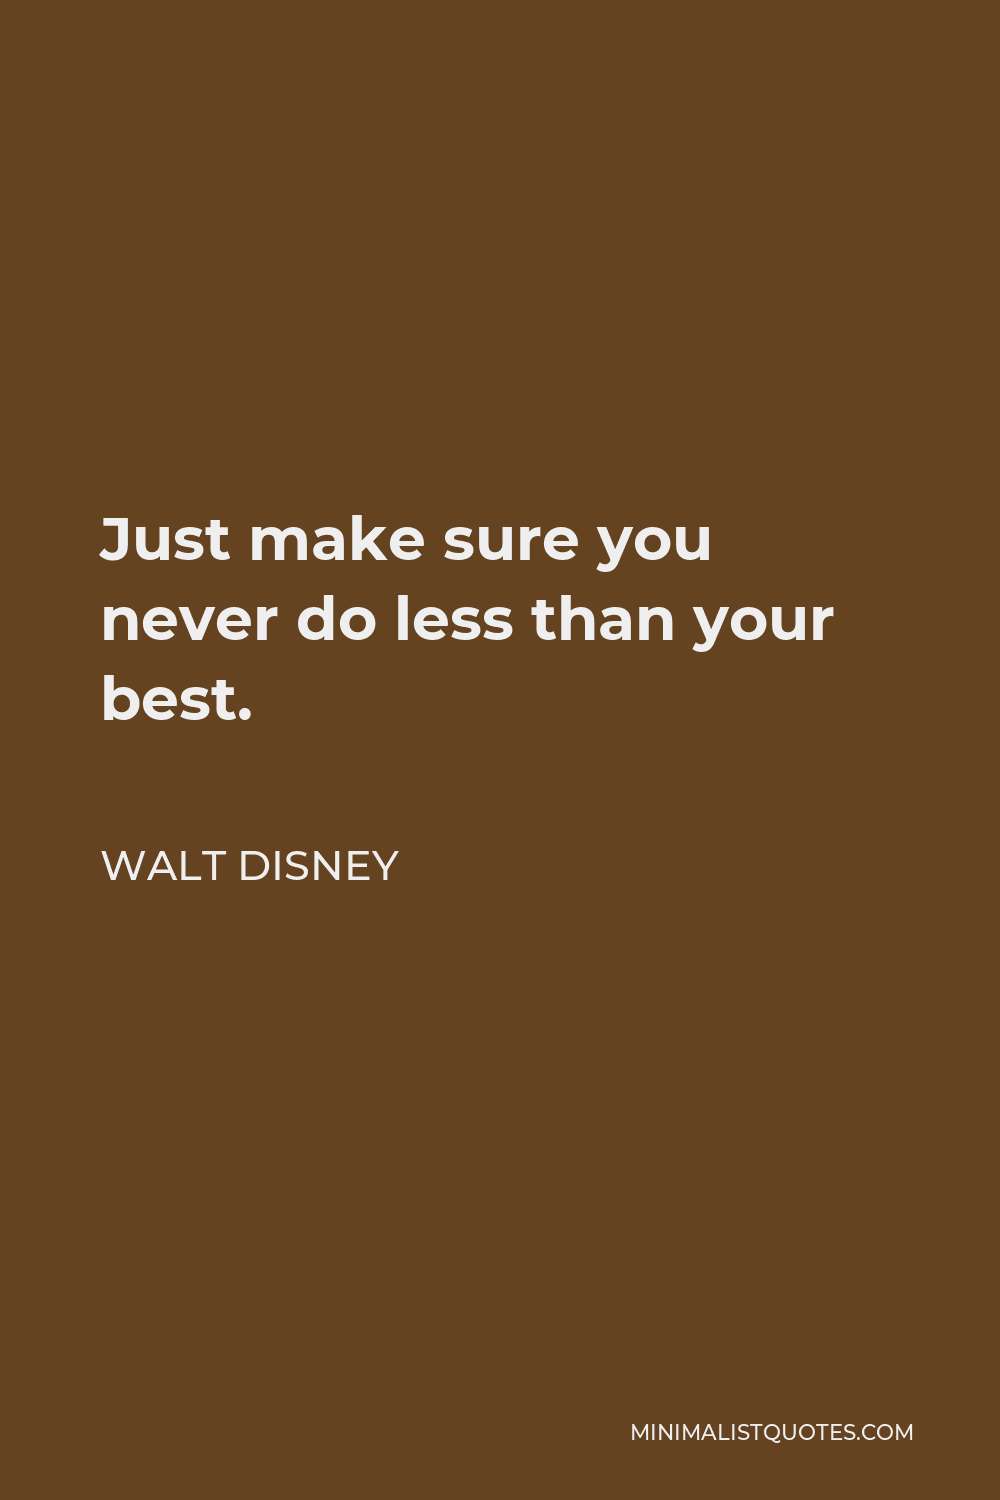 Walt Disney Quote - Just make sure you never do less than your best.